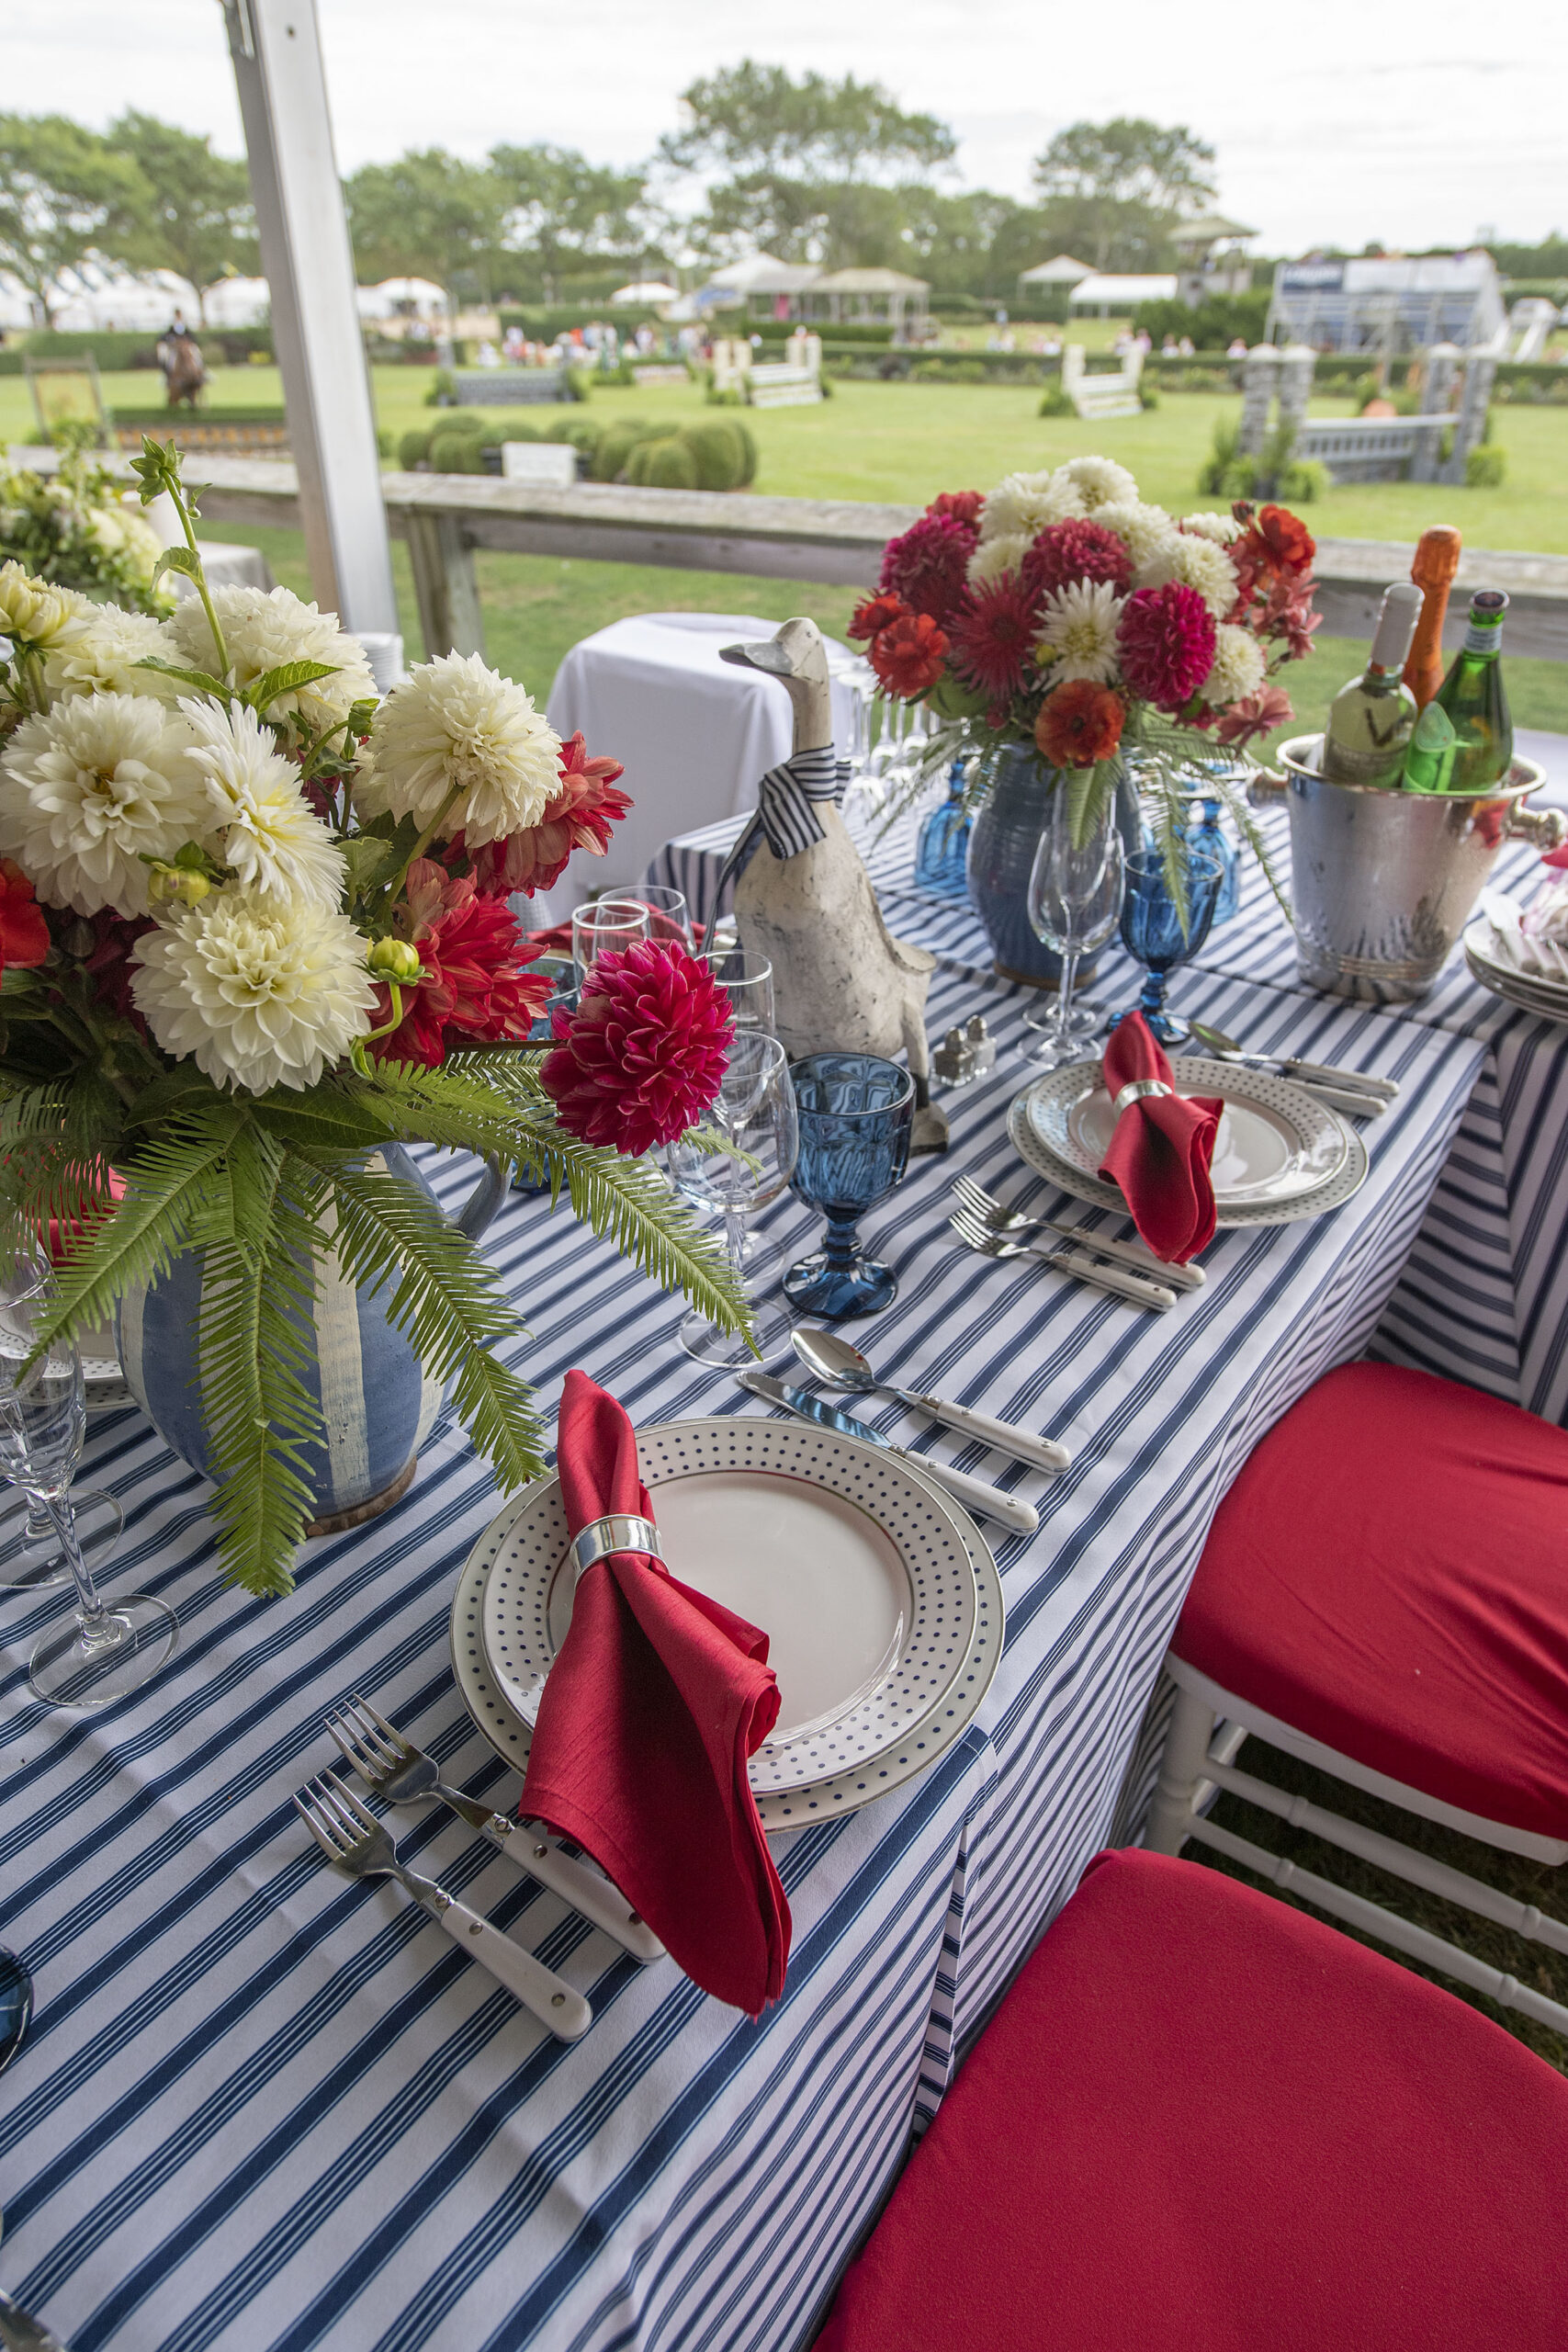 The table setting for the Split Rock Farm table in the VIP tent at the 2021 Hampton Classic on Grand Prix Sunday, September 5th, 2021